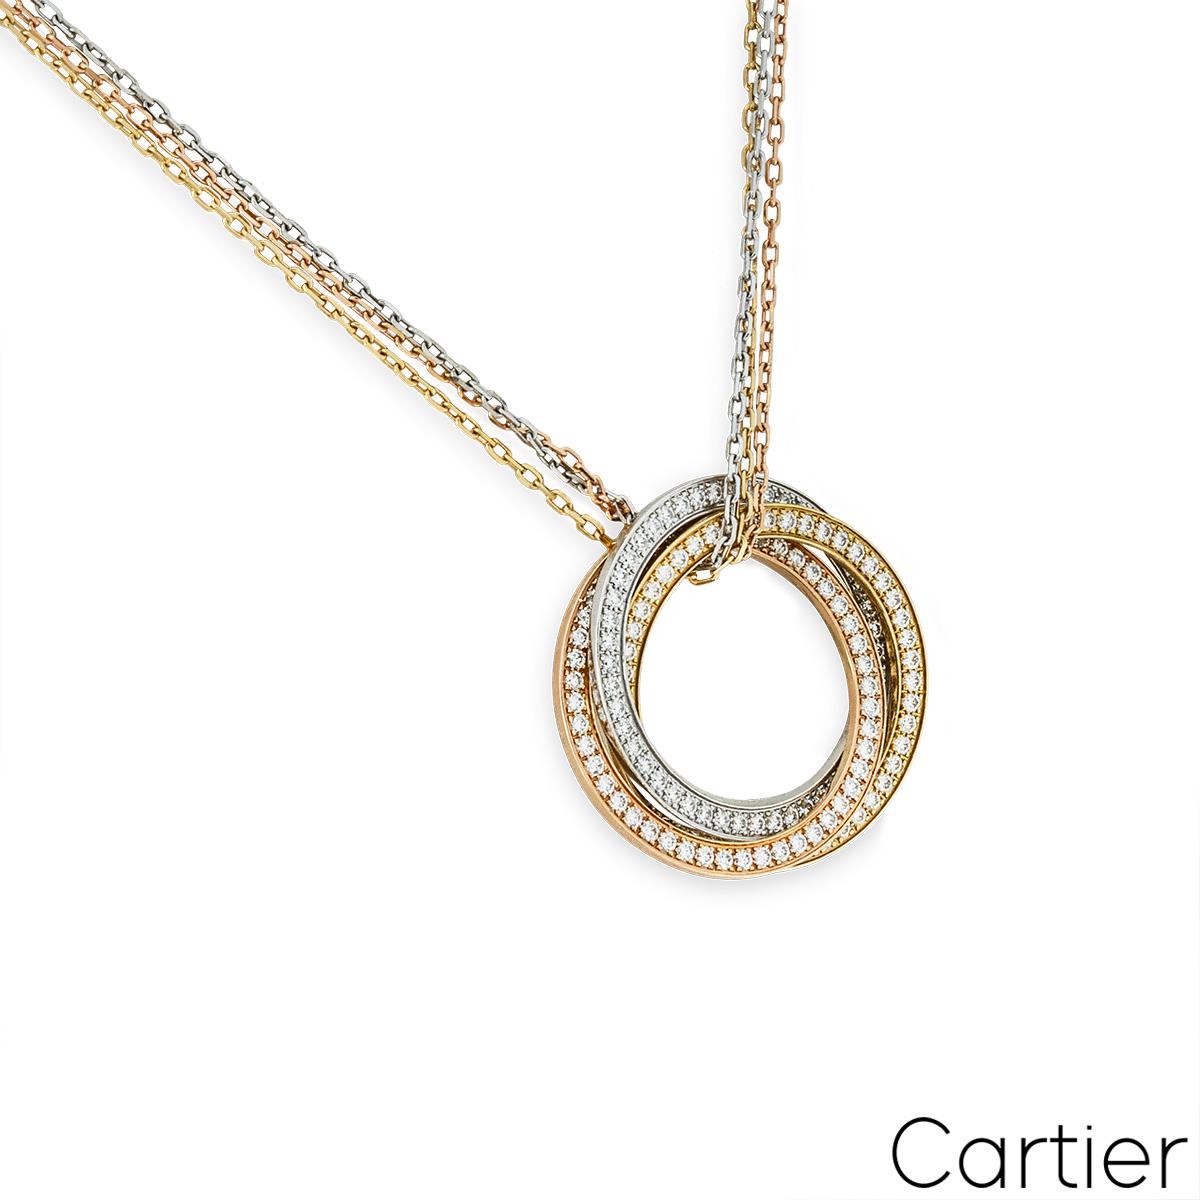 An alluring 18k tri-colour gold diamond necklace by Cartier from the Trinity De Cartier collection. The necklace is composed of three open work circular motifs entwining in yellow, white and rose gold set with 144 pave round brilliant cut diamonds